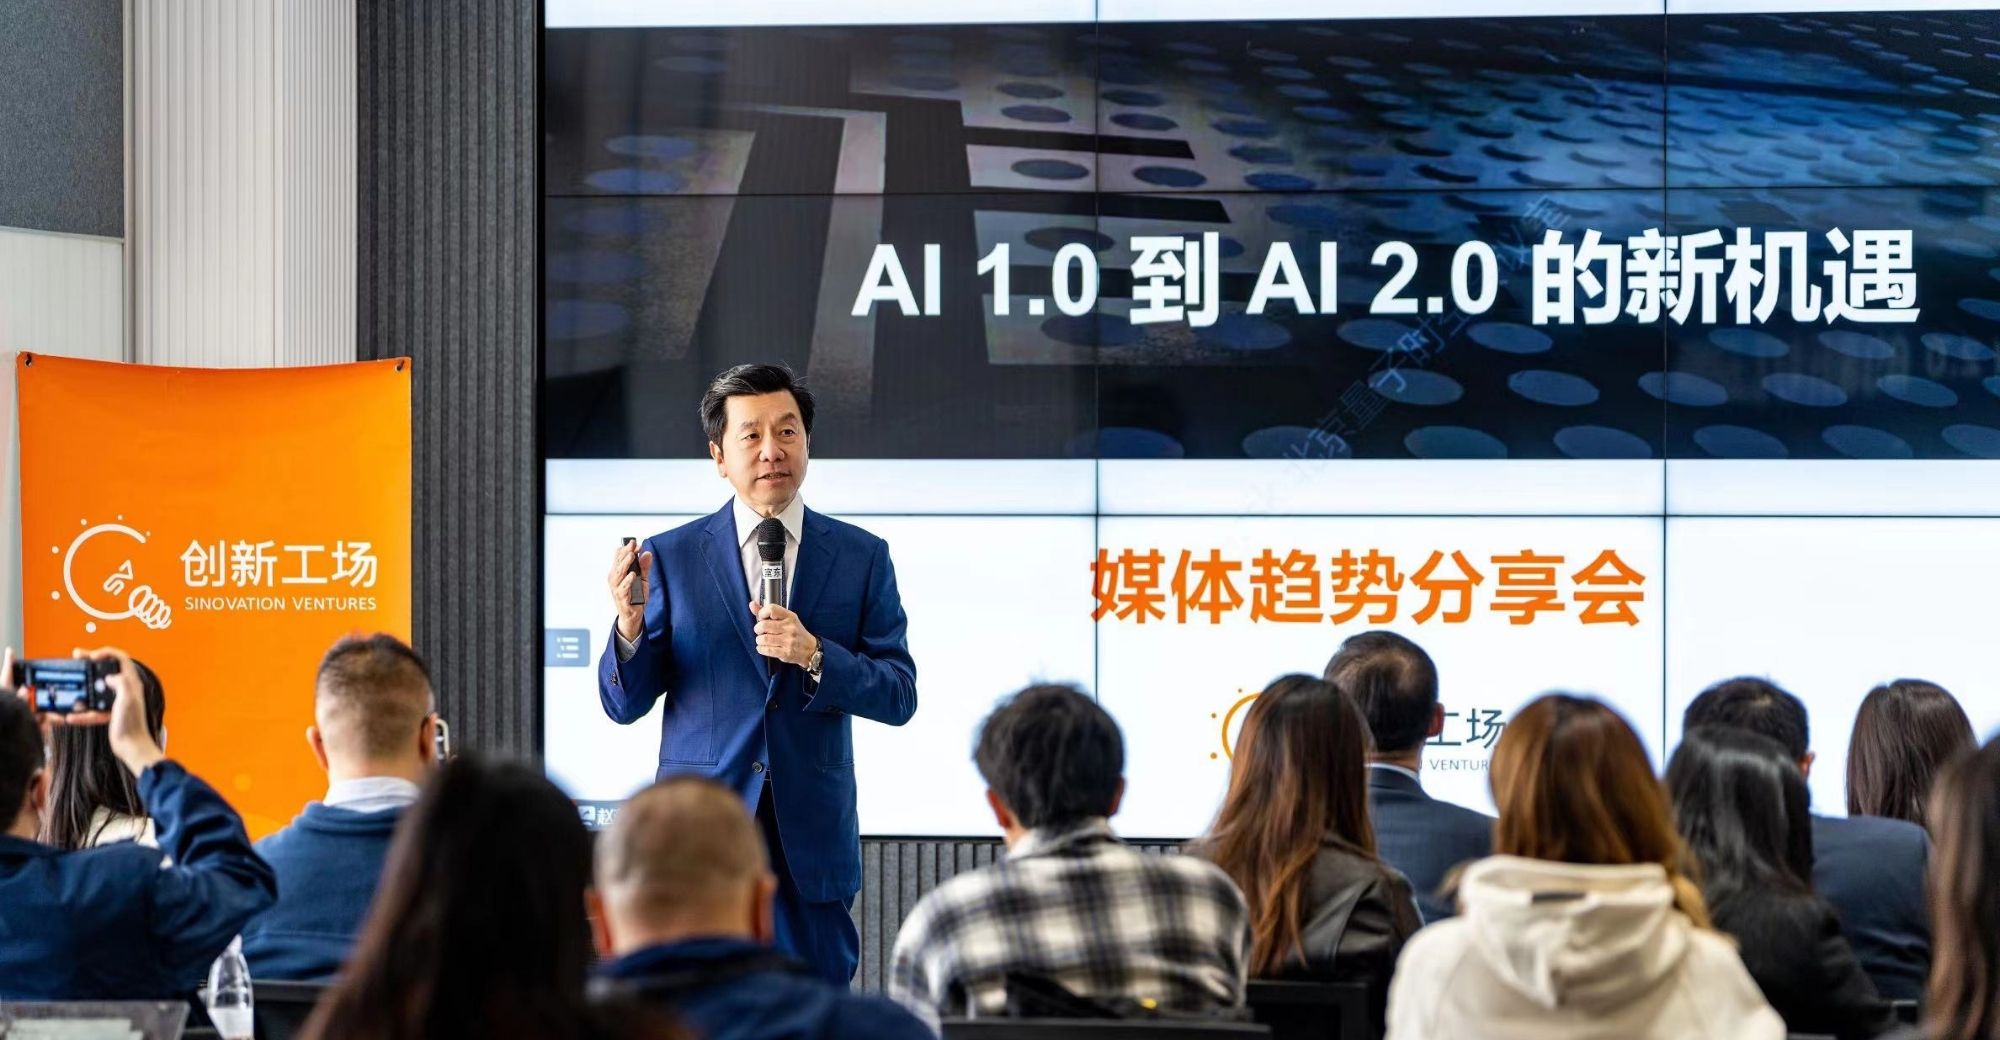 Sinovation Ventures Chairman, Kai-Fu Lee’s AI2.0 Company Has Officially Been Named